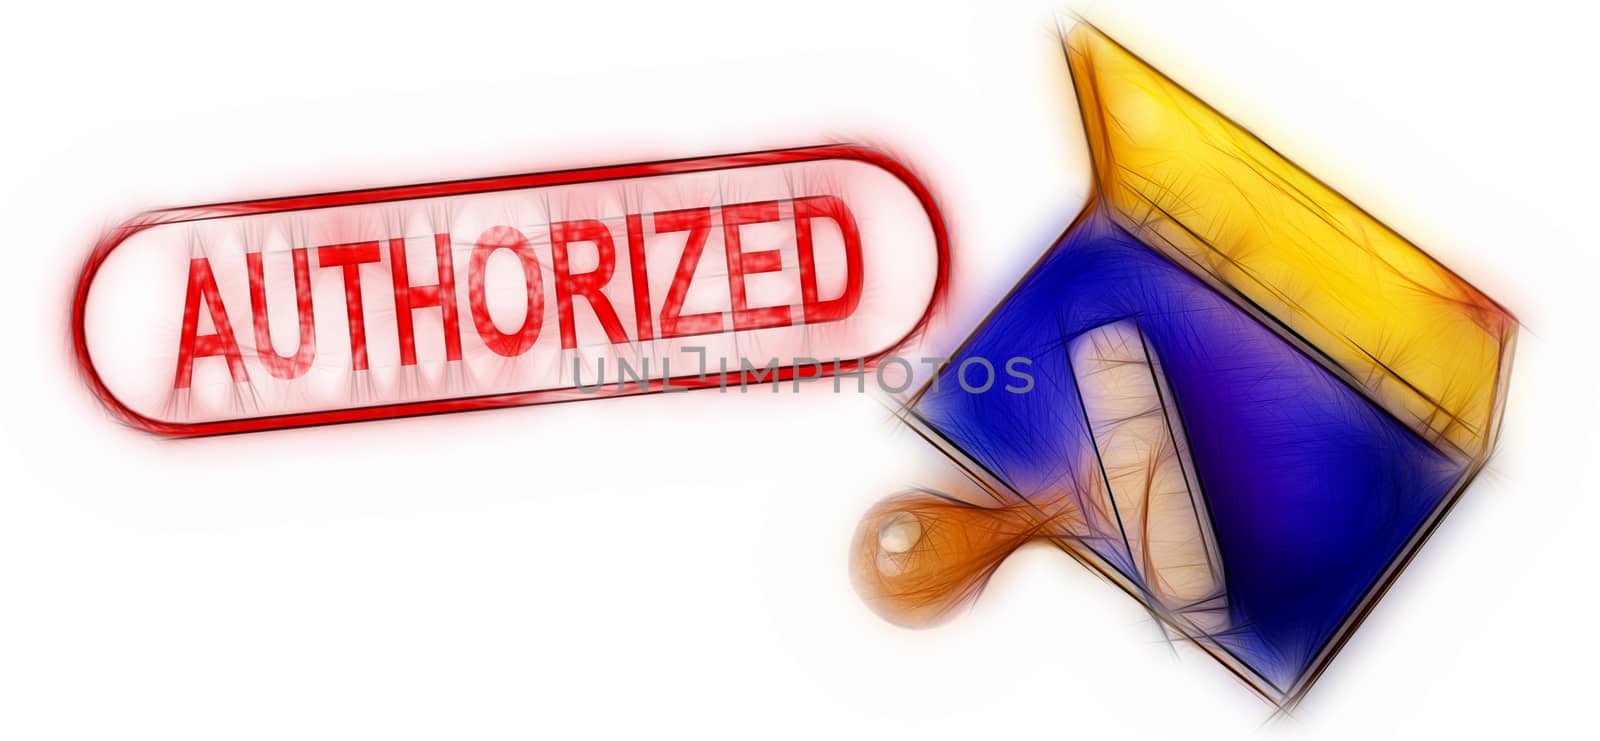 Top view of a rubber stamp with a giant word "Authorized  " printed, isolated on white background.